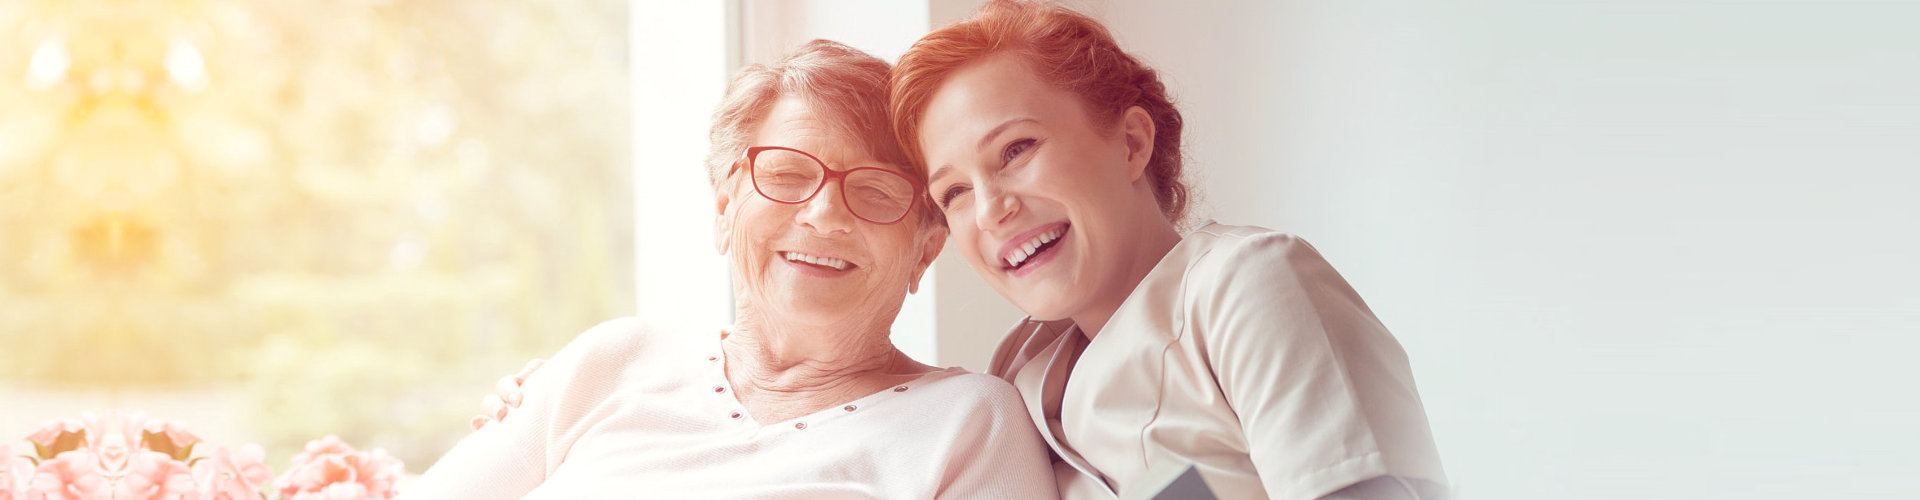 middle aged woman enjoying a bright morning with an elderly woman